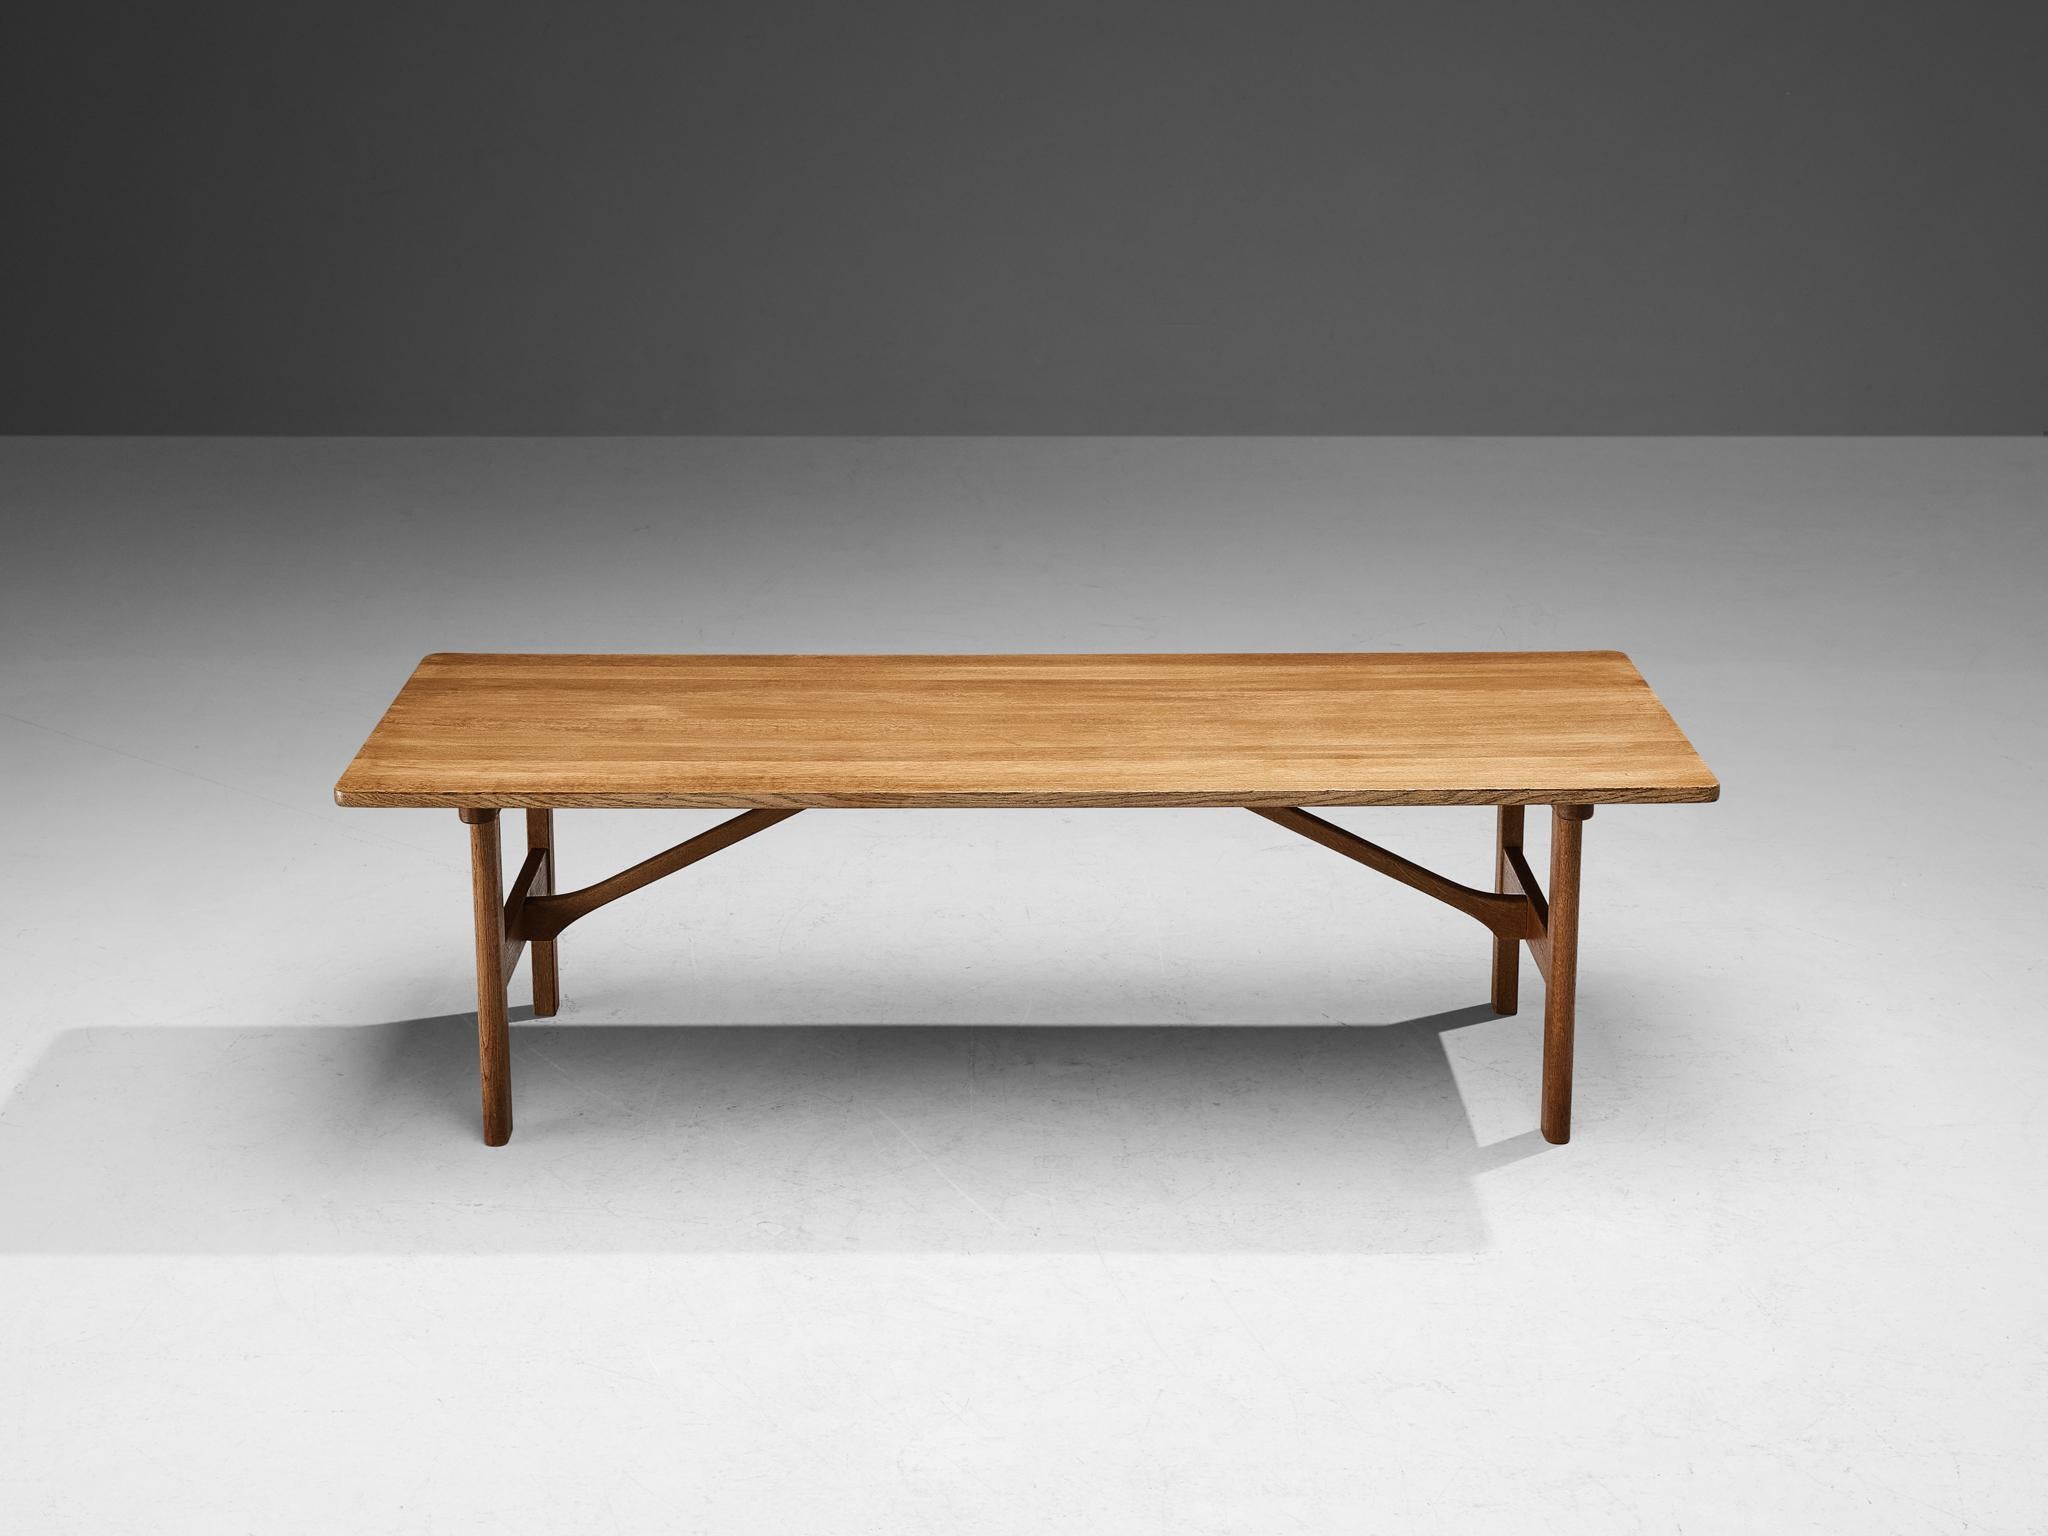 Børge Mogensen for Fredericia Stolefabrik, coffee table model '5268', oak, Denmark, 1967

Wonderful coffee table designed by Danish master Børge Mogensen. The design shows a strong and solid construction executed in oak. This is realized by the